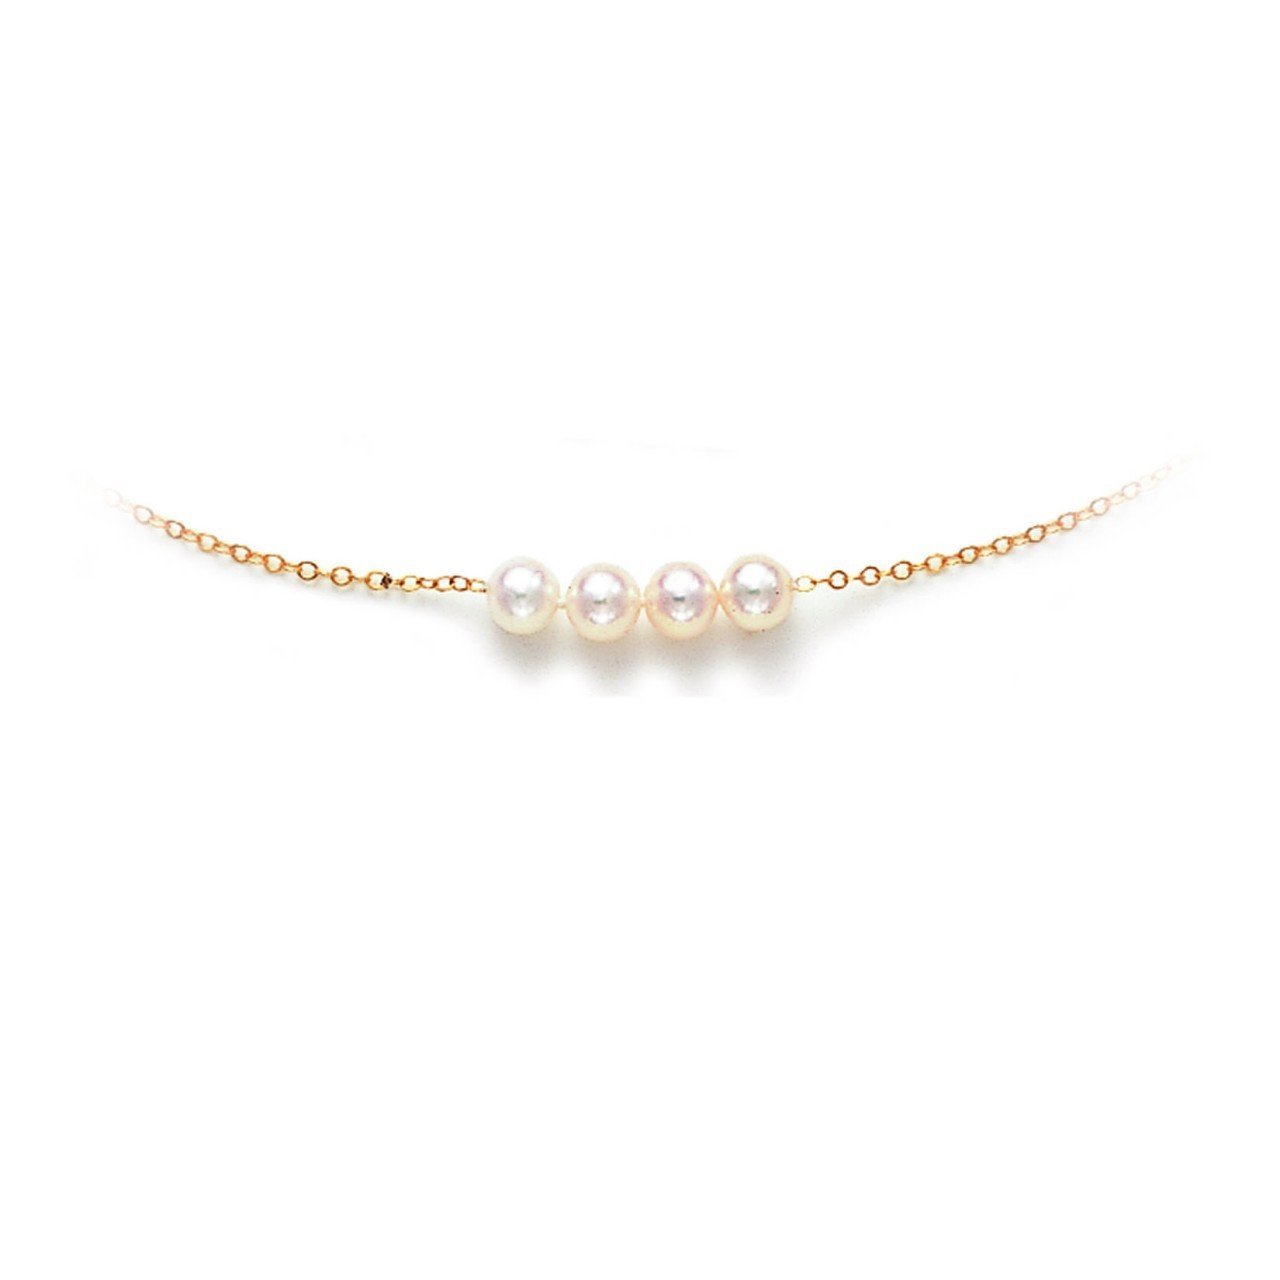 Princesse Pearl Cultured Starter Necklace in Four Pearls